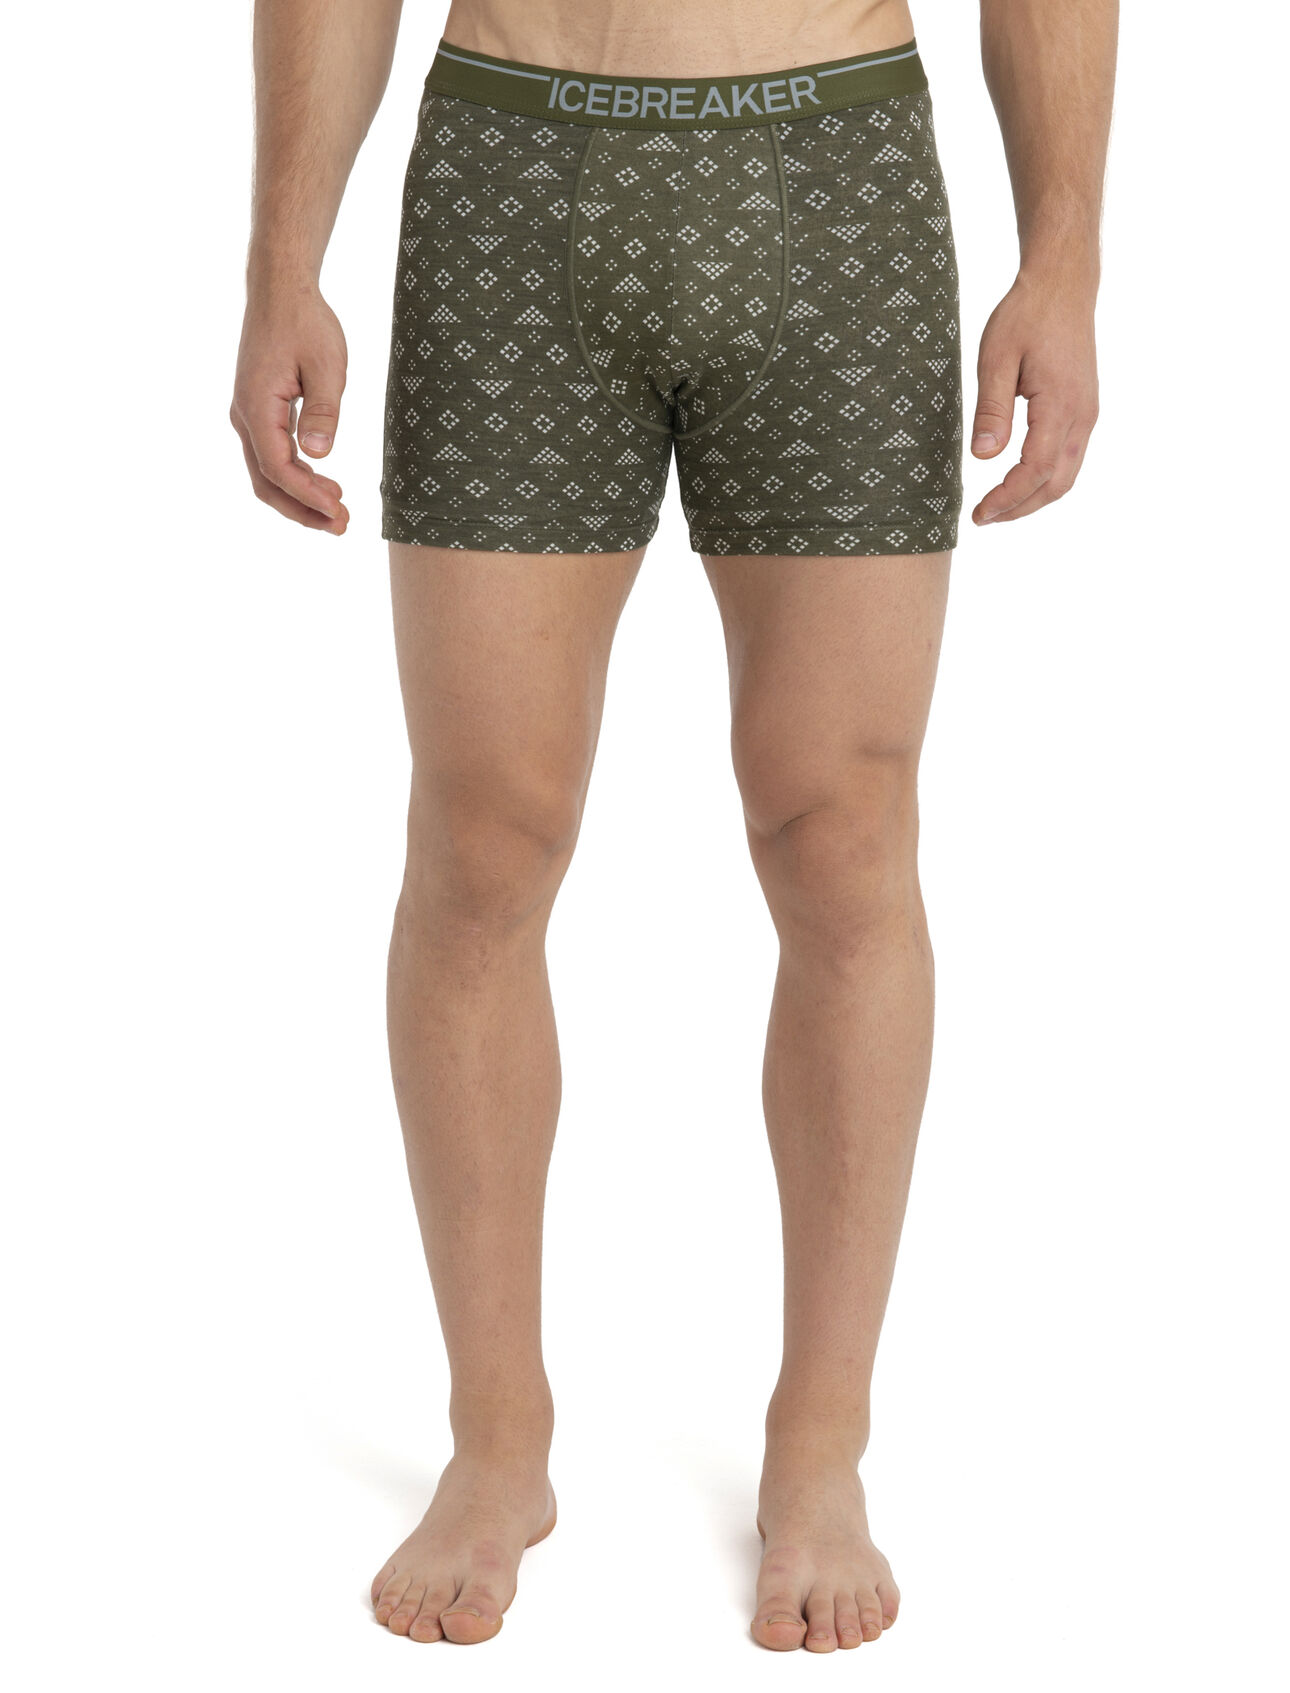 Mens Merino 150 Anatomica Boxers First Snow Stretchy and slim-fit merino wool boxers made with our corespun fabric, the Anatomica Boxers First Snow offer the support and comfort you need, with a unique geometric pattern inspired by snowflakes.